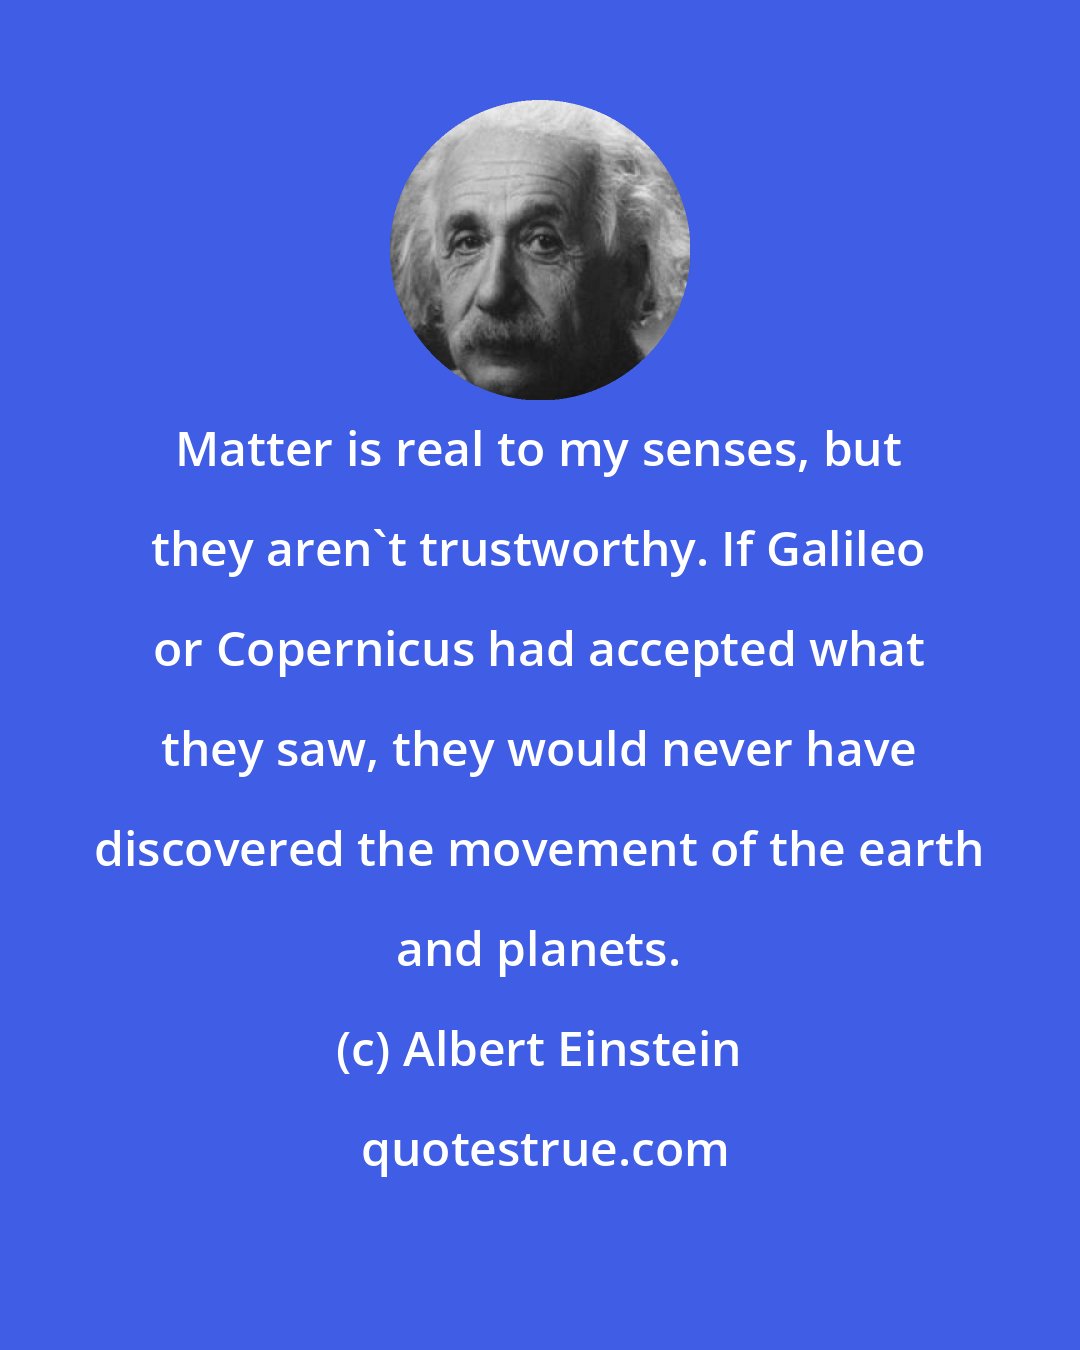 Albert Einstein: Matter is real to my senses, but they aren't trustworthy. If Galileo or Copernicus had accepted what they saw, they would never have discovered the movement of the earth and planets.